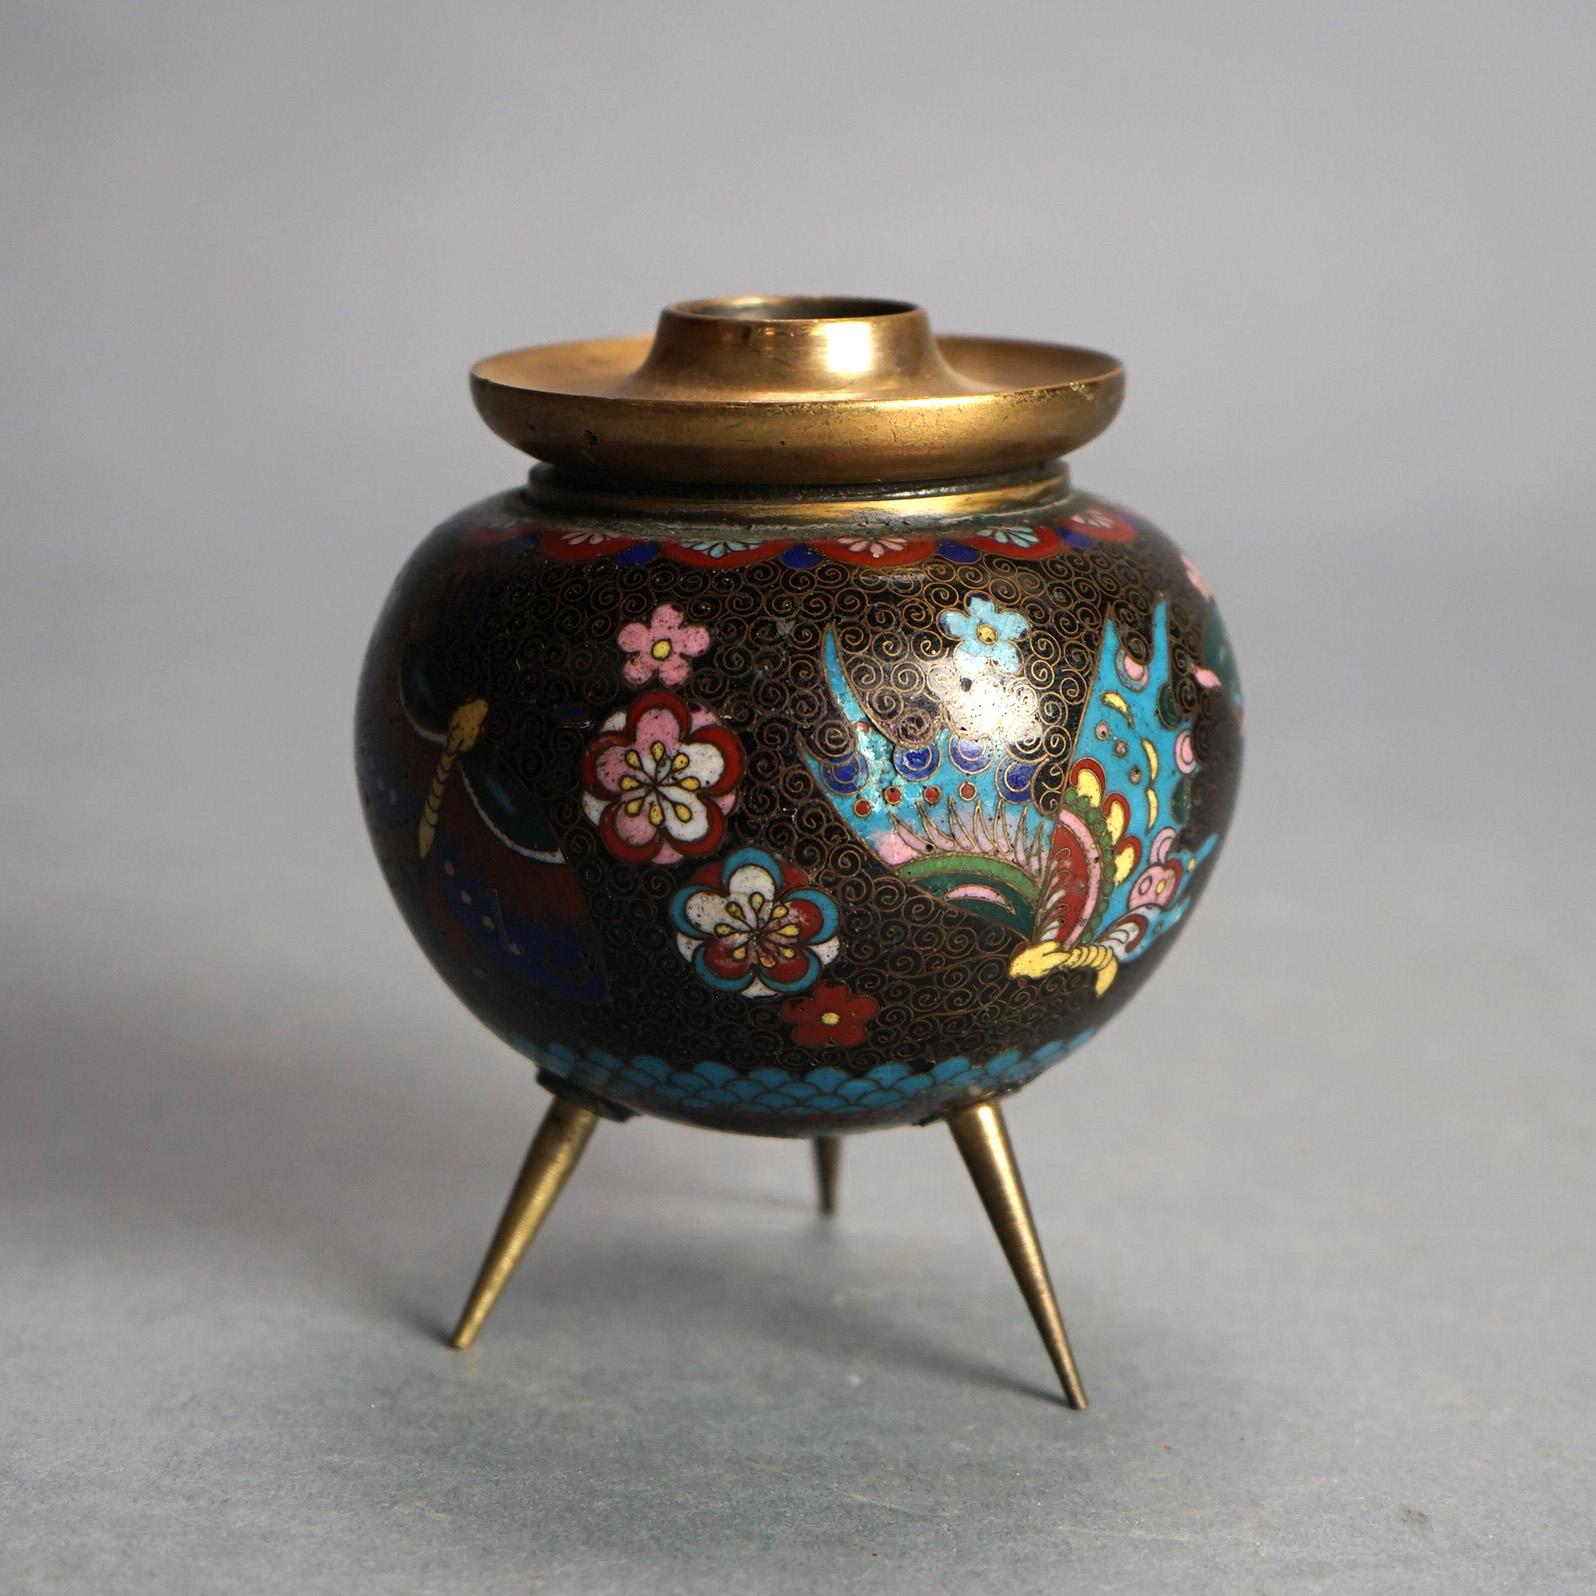 20th Century Antique Japanese Cloisonne Enameled Footed Candleholder with Butterflies C1920 For Sale